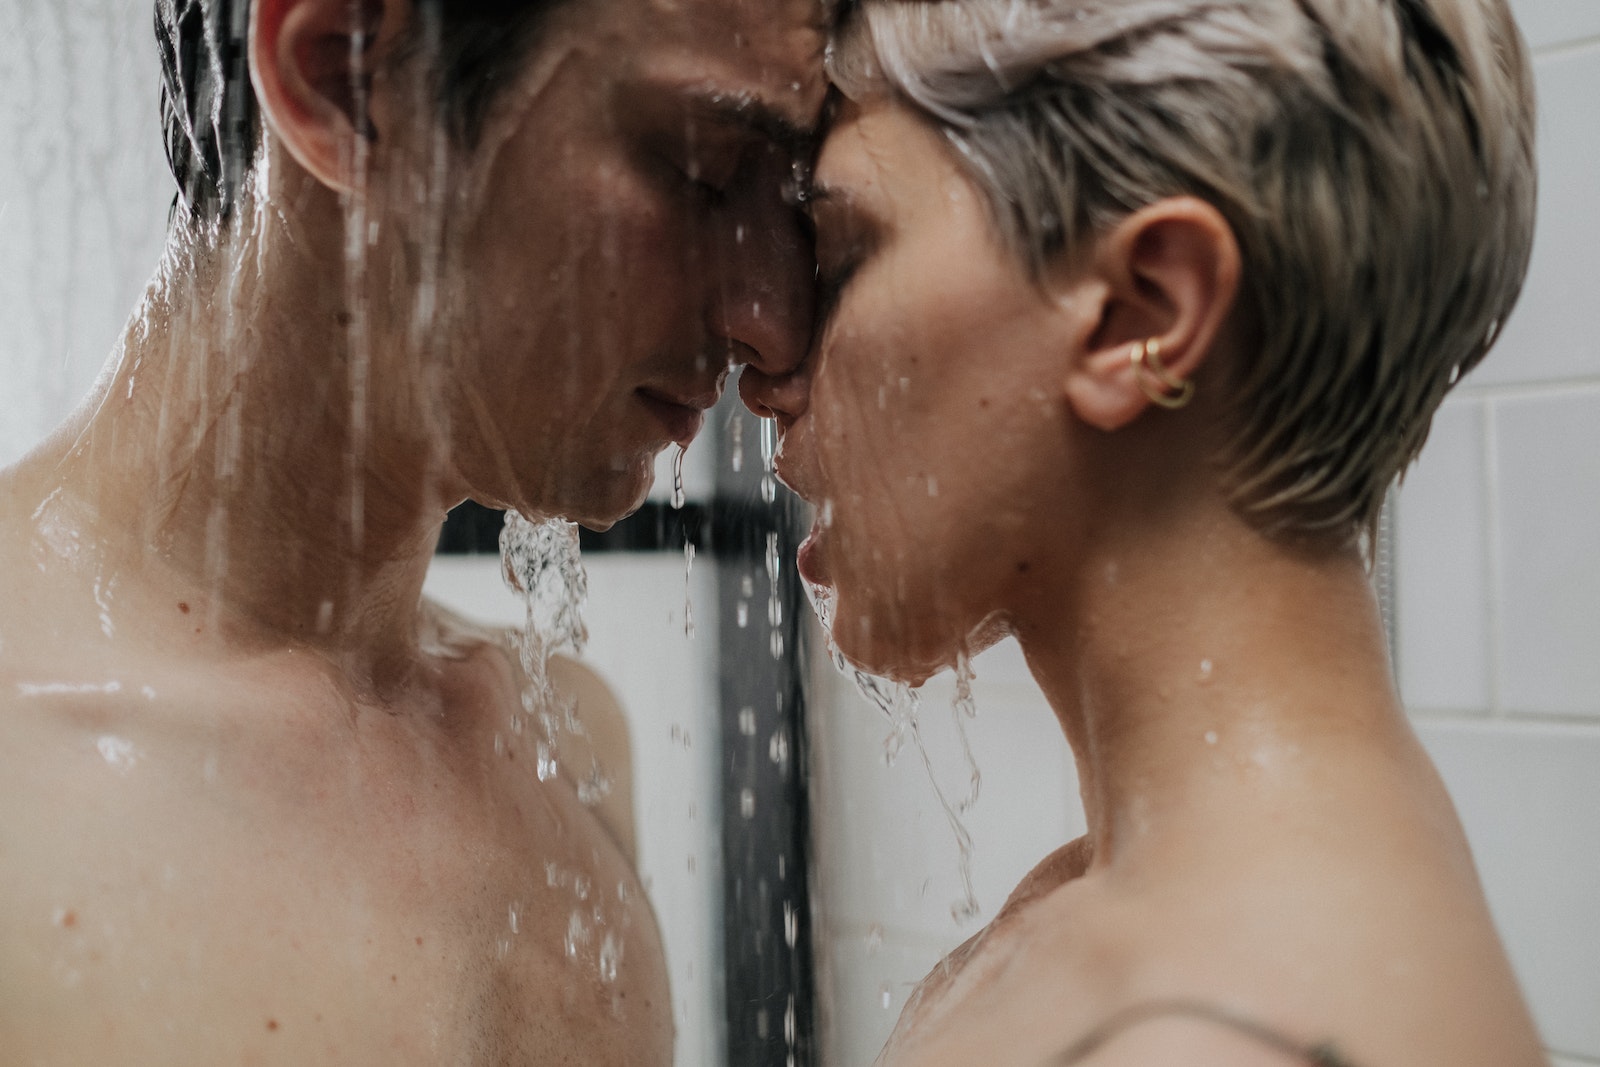 A Couple Intimacy in the Shower